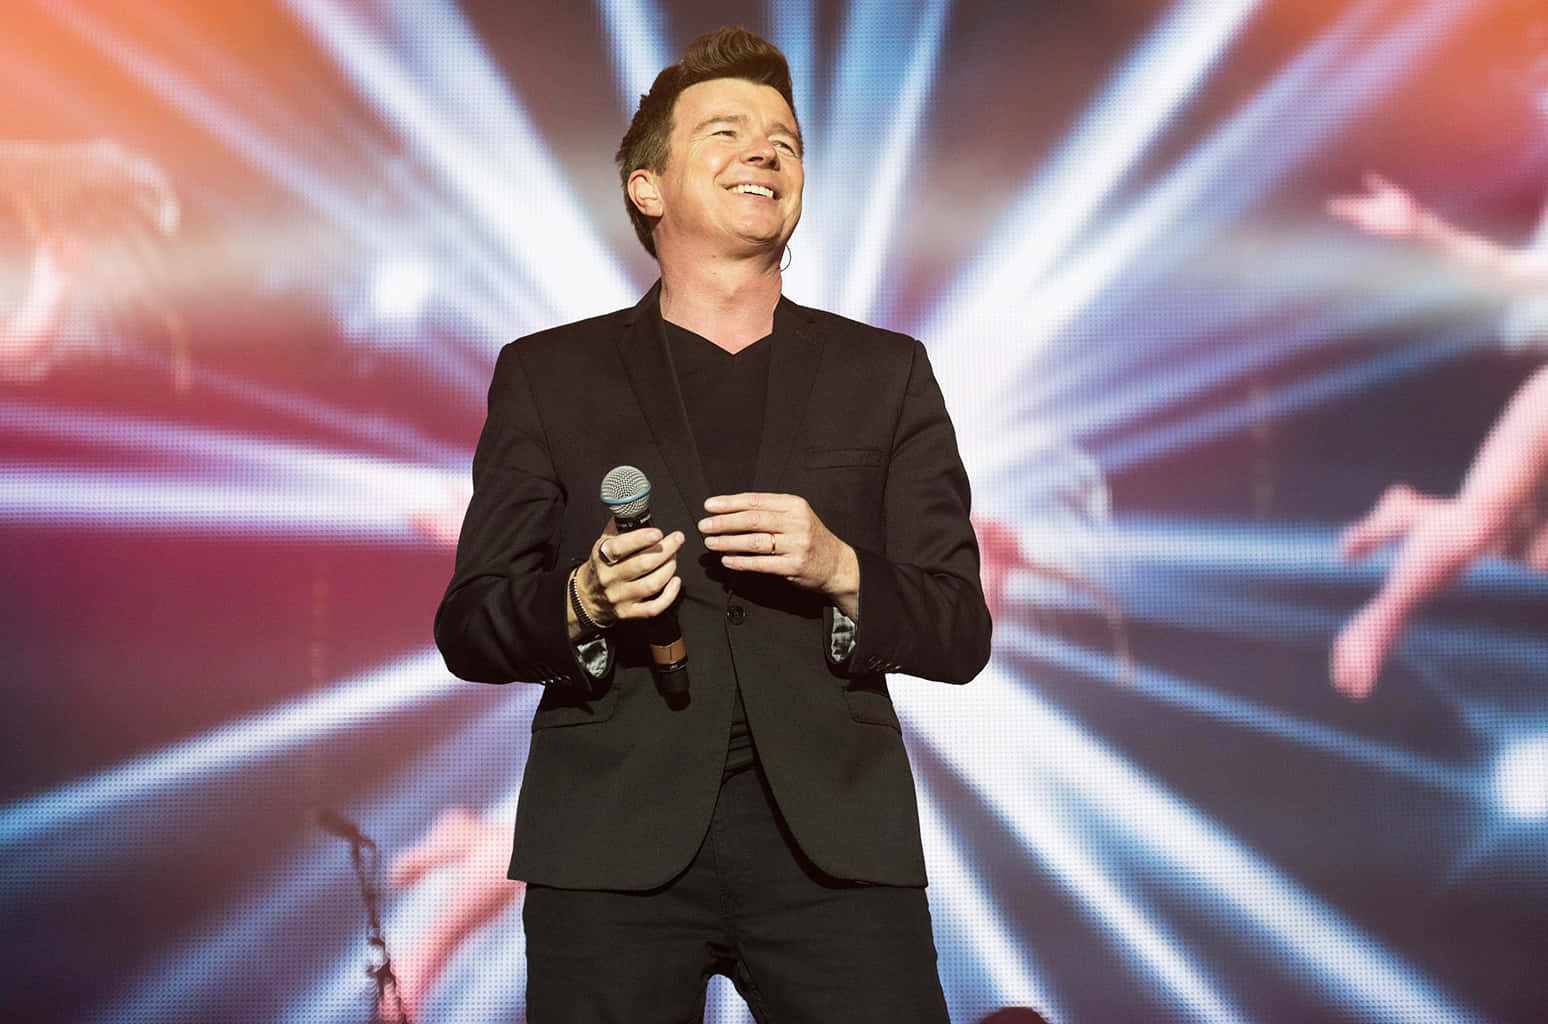 Rick Astley Gets Ready To Perform